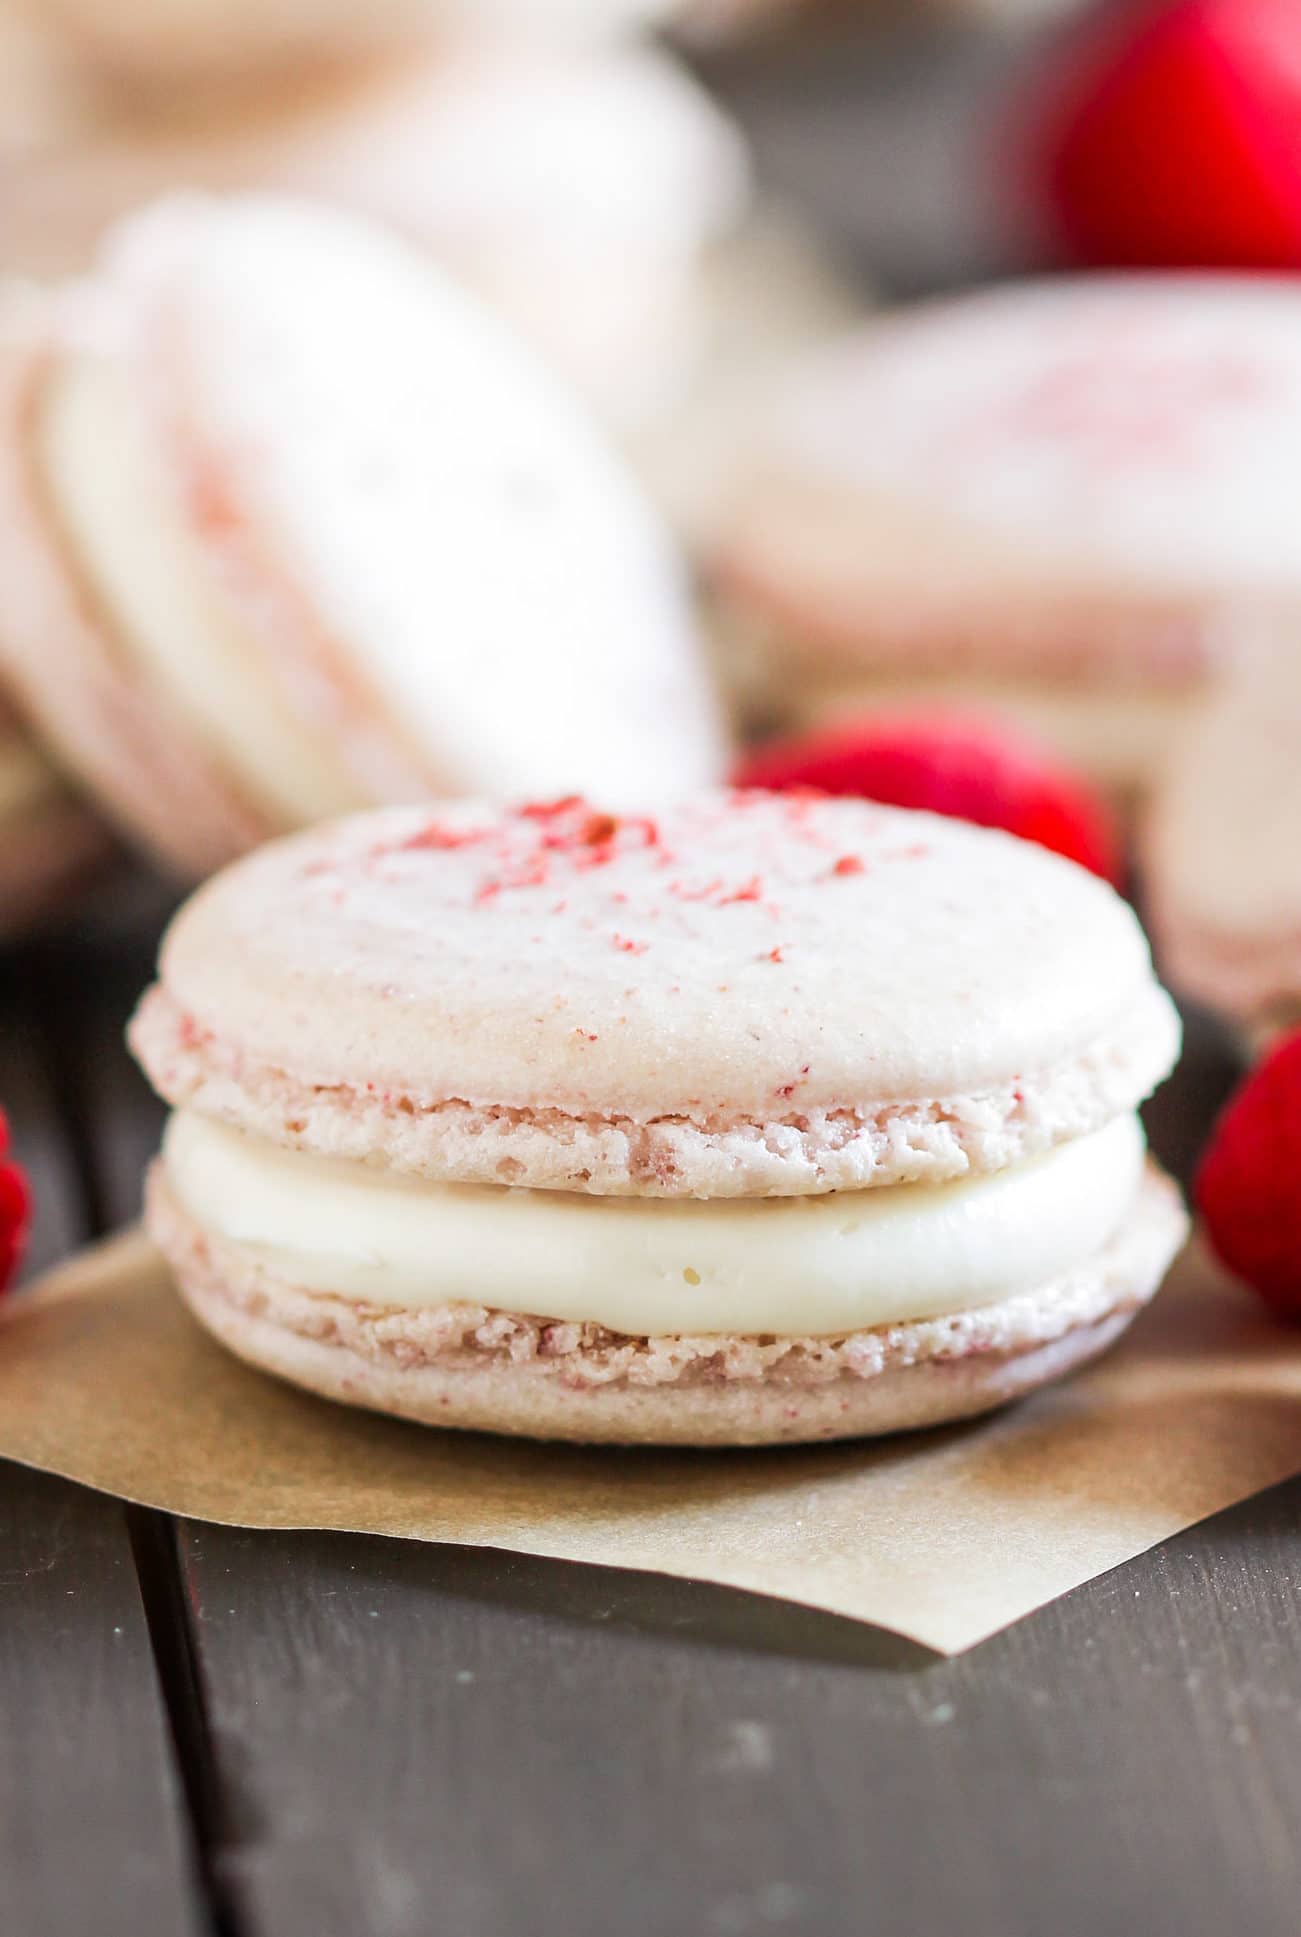 How to make Healthy Raspberry French Macarons! These are sweet, addicting, and packed with raspberry flavor, you'd never know they're made without white sugar, artificial flavorings, and artificial food dyes! These are all natural, low fat, and gluten free. PERFECT for Valentine's Day, birthdays and gifting! Healthy Dessert Recipes at the Desserts With Benefits Blog (www.DessertsWithBenefits.com)